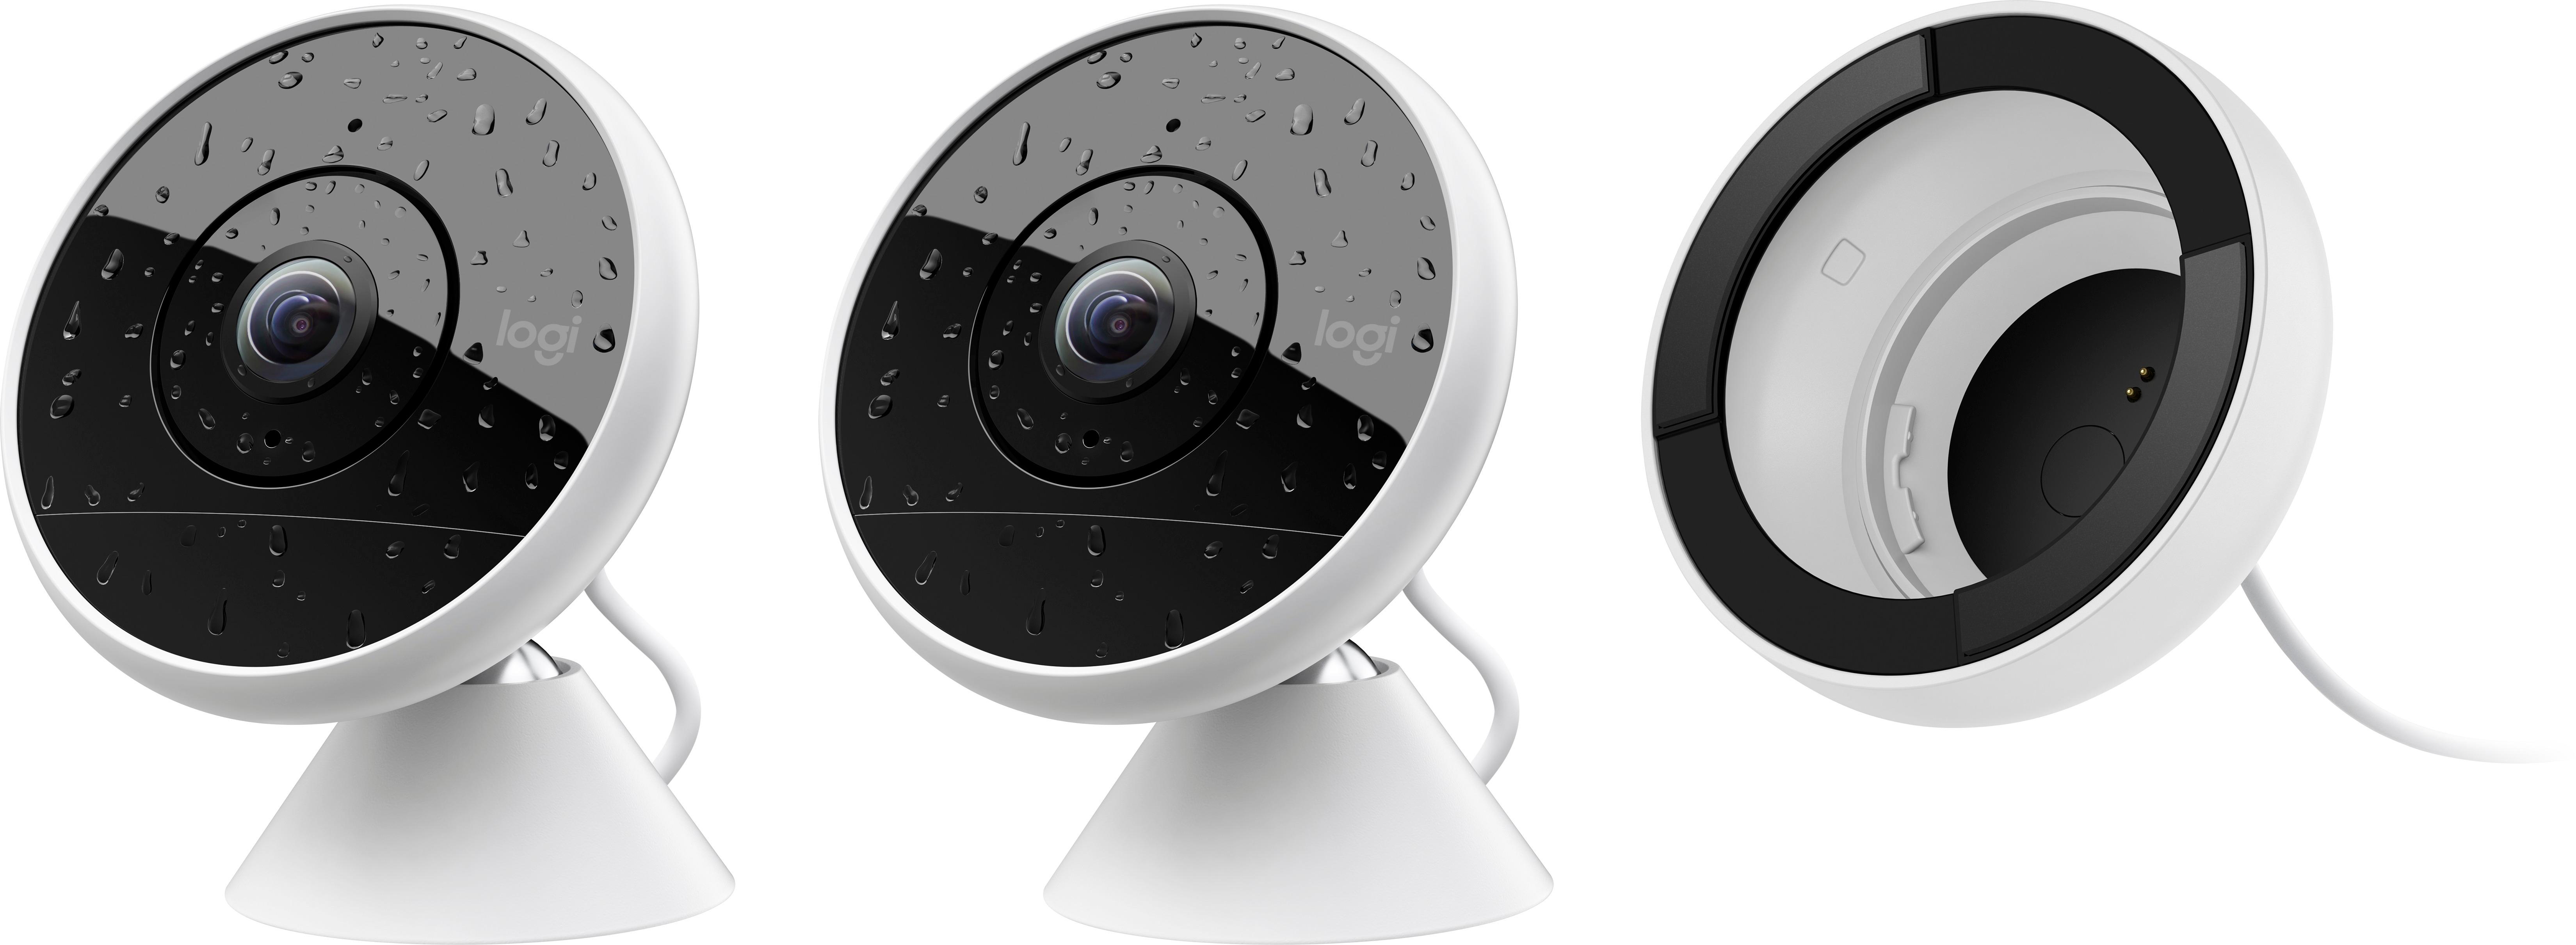 astronomi fajance Fruity Best Buy: Logitech Circle 2 Indoor/Outdoor 1080p Wi-Fi Home Security Camera  (2-Pack) 961-000469